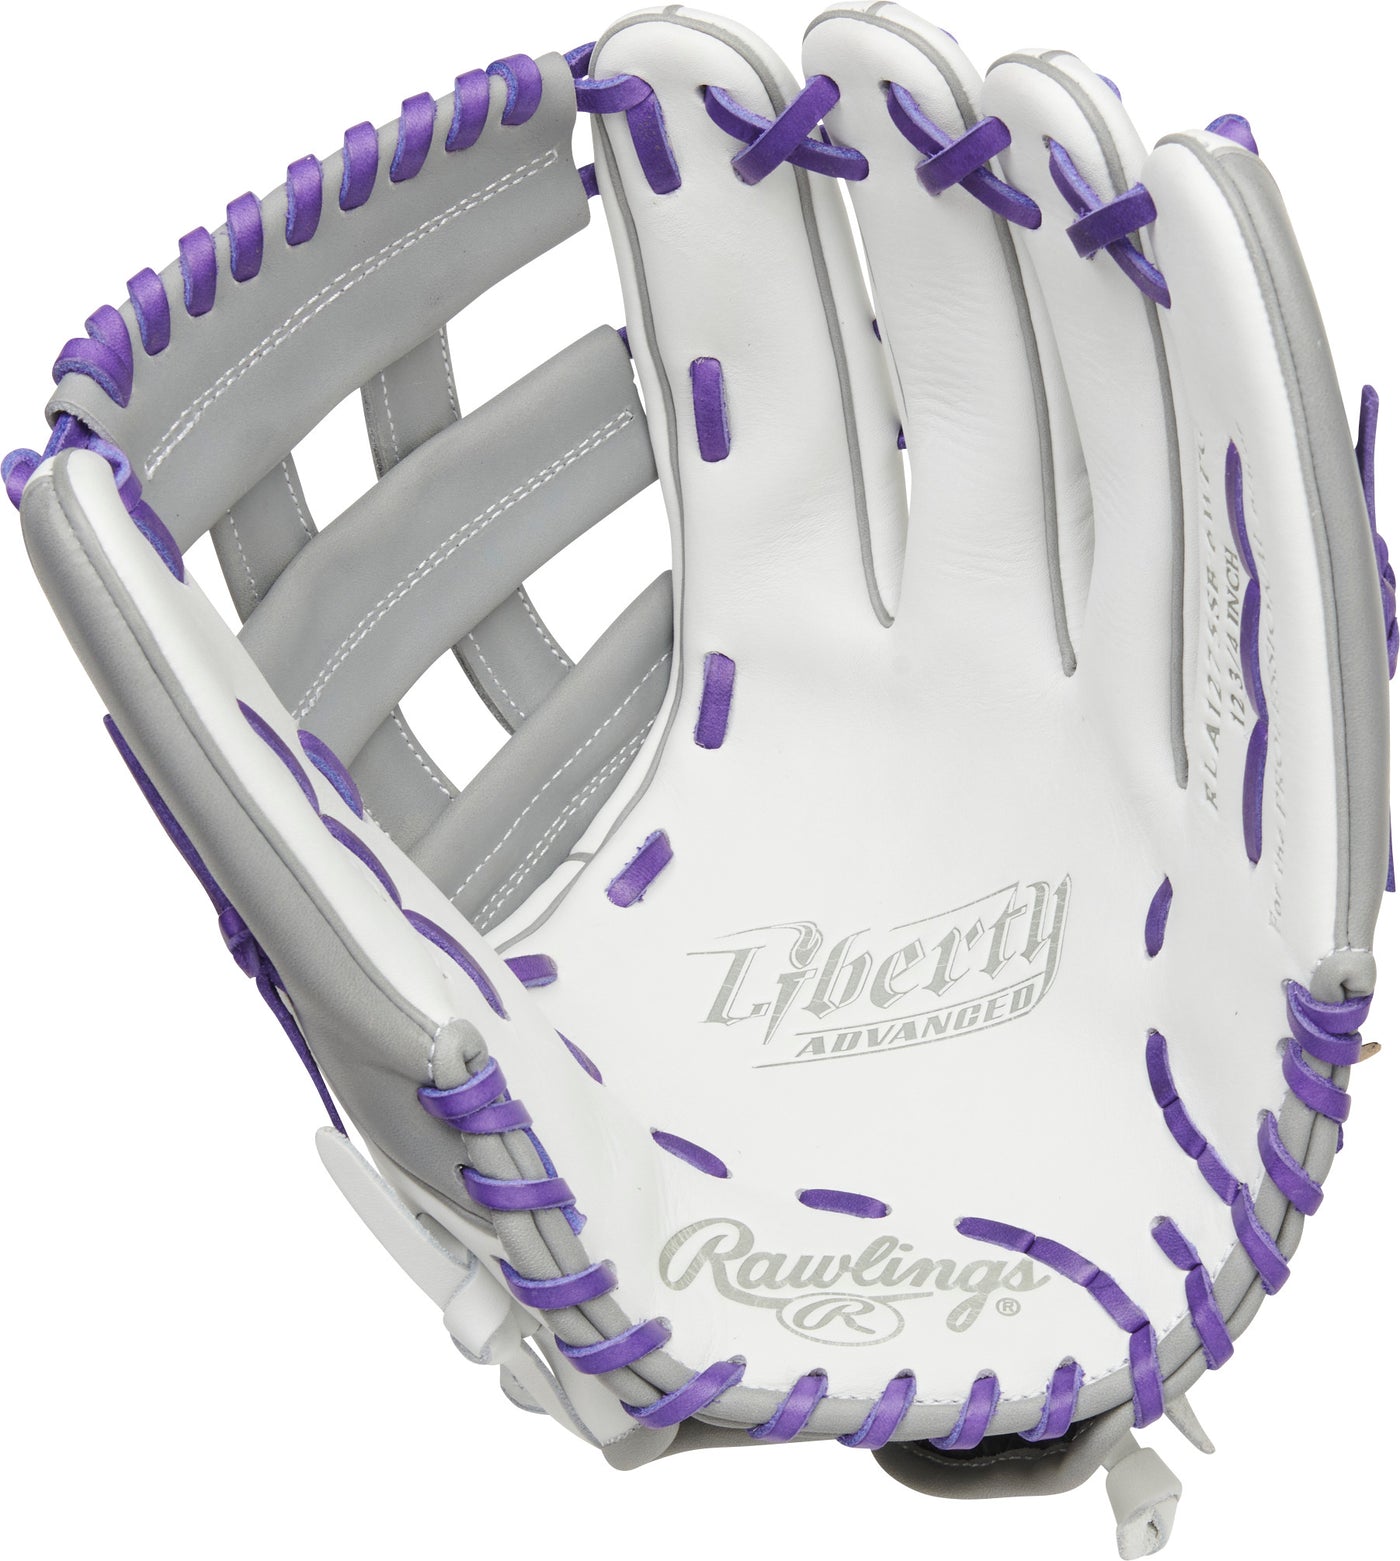 Rawlings Liberty Advanced Color 12.75 – Sports Series RLA1275SB Outfield HB Glove